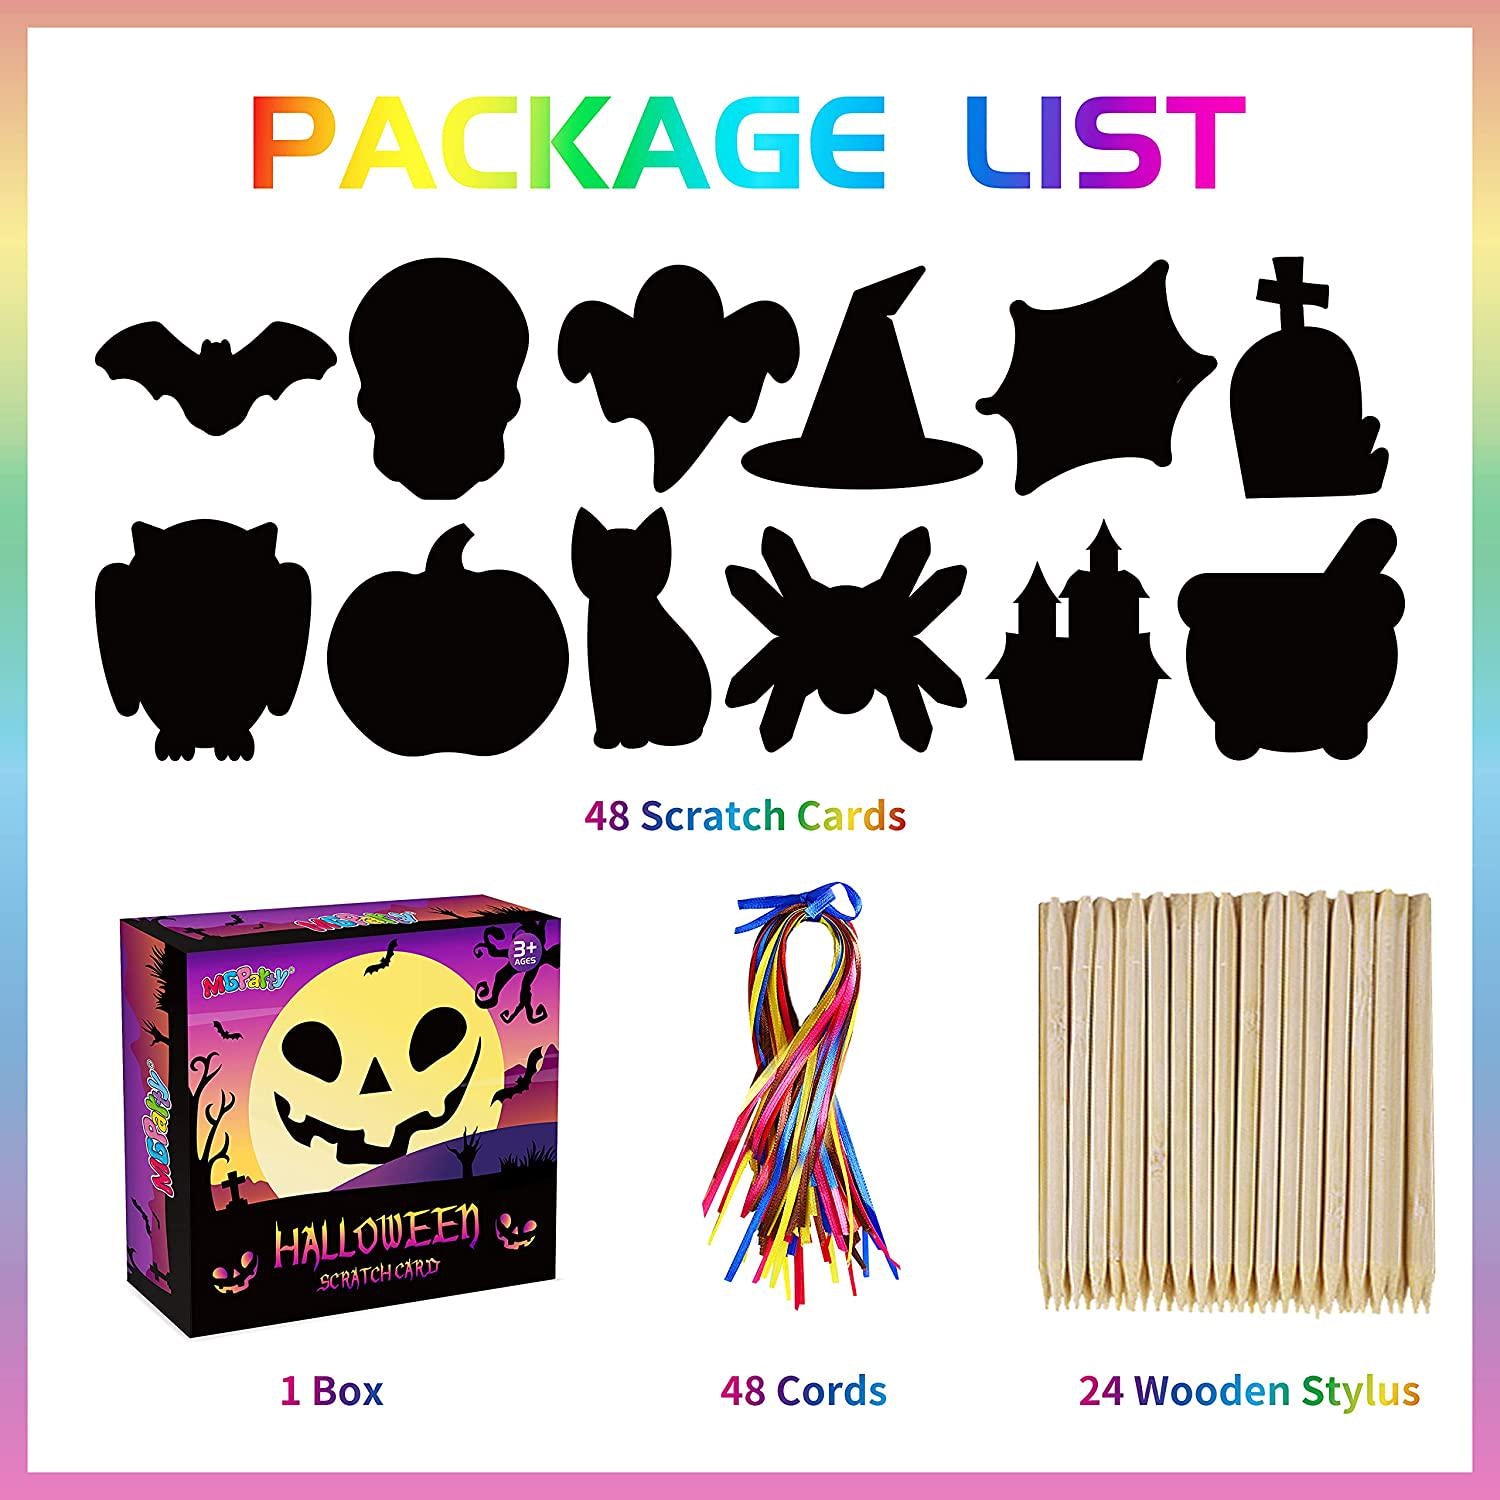 MGparty, MGparty Scratch Paper Craft for Kids - 48 Pcs Halloween Magic Rainbow Scratch Paper Off Cards Set for Kids Crafts Arts Supplies Halloween Ornaments Party Games Halloween Birthday Gift